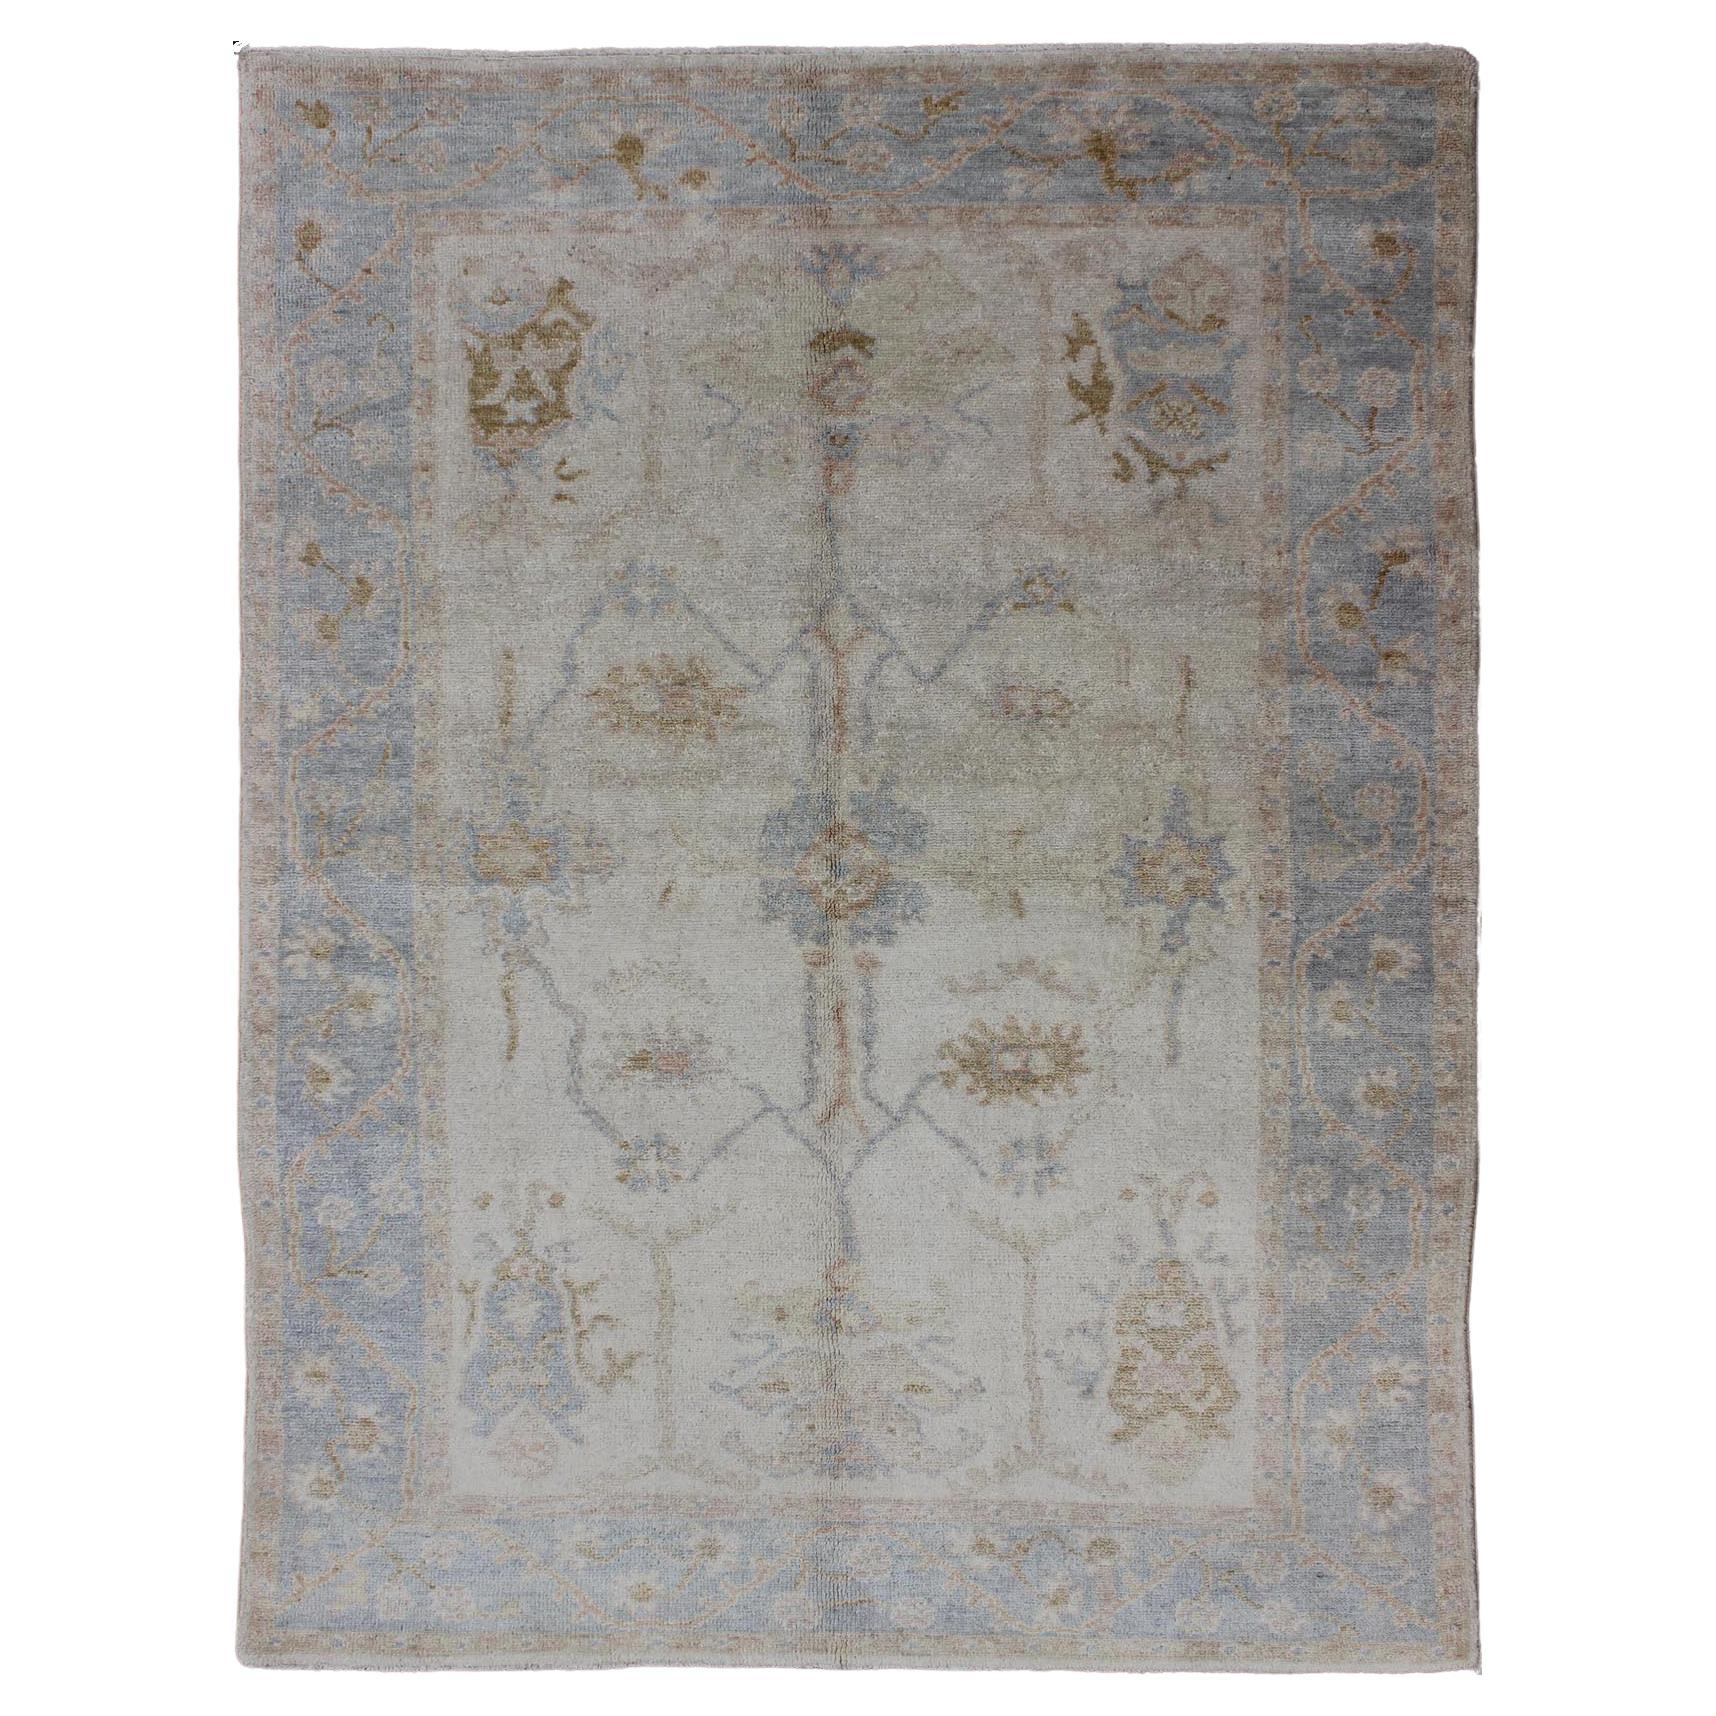 Muted Oushak Rug in Blue, Light Brown, and White